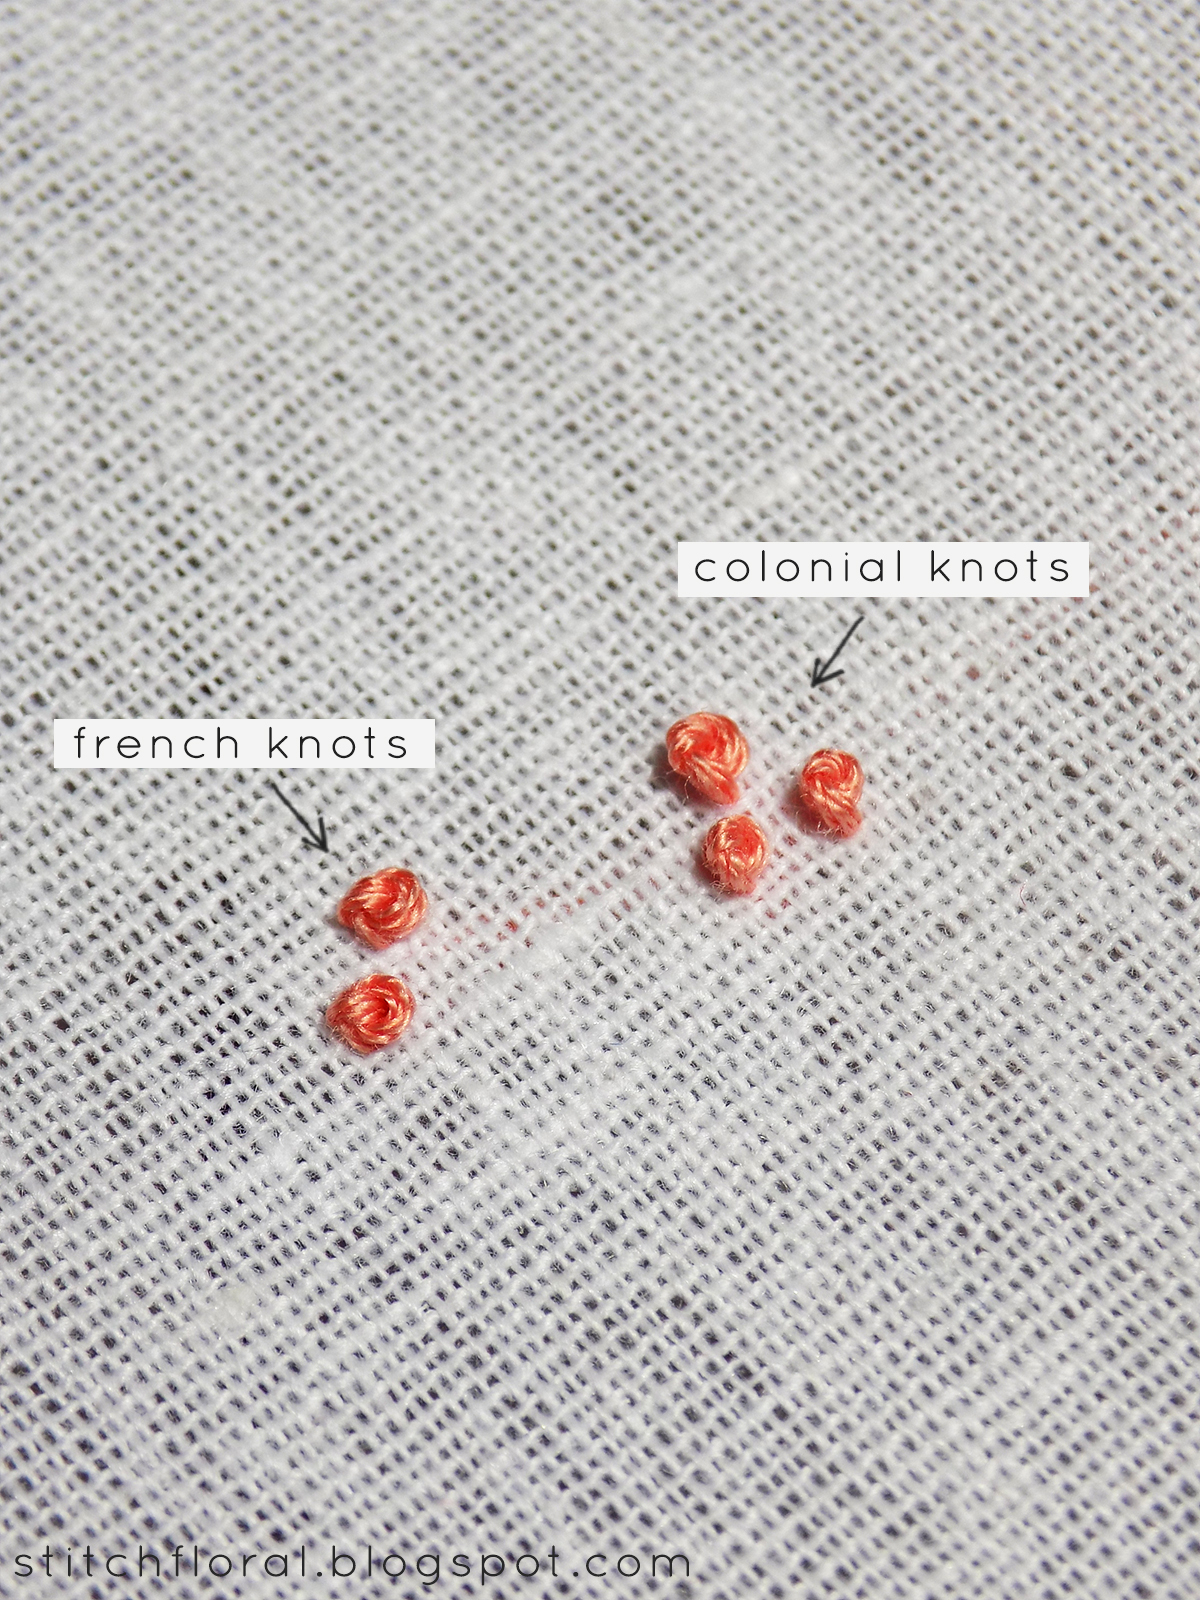 French Knots Embroidery Patterns Colonial Knot And Hows It Different From French Knot Stitch Floral